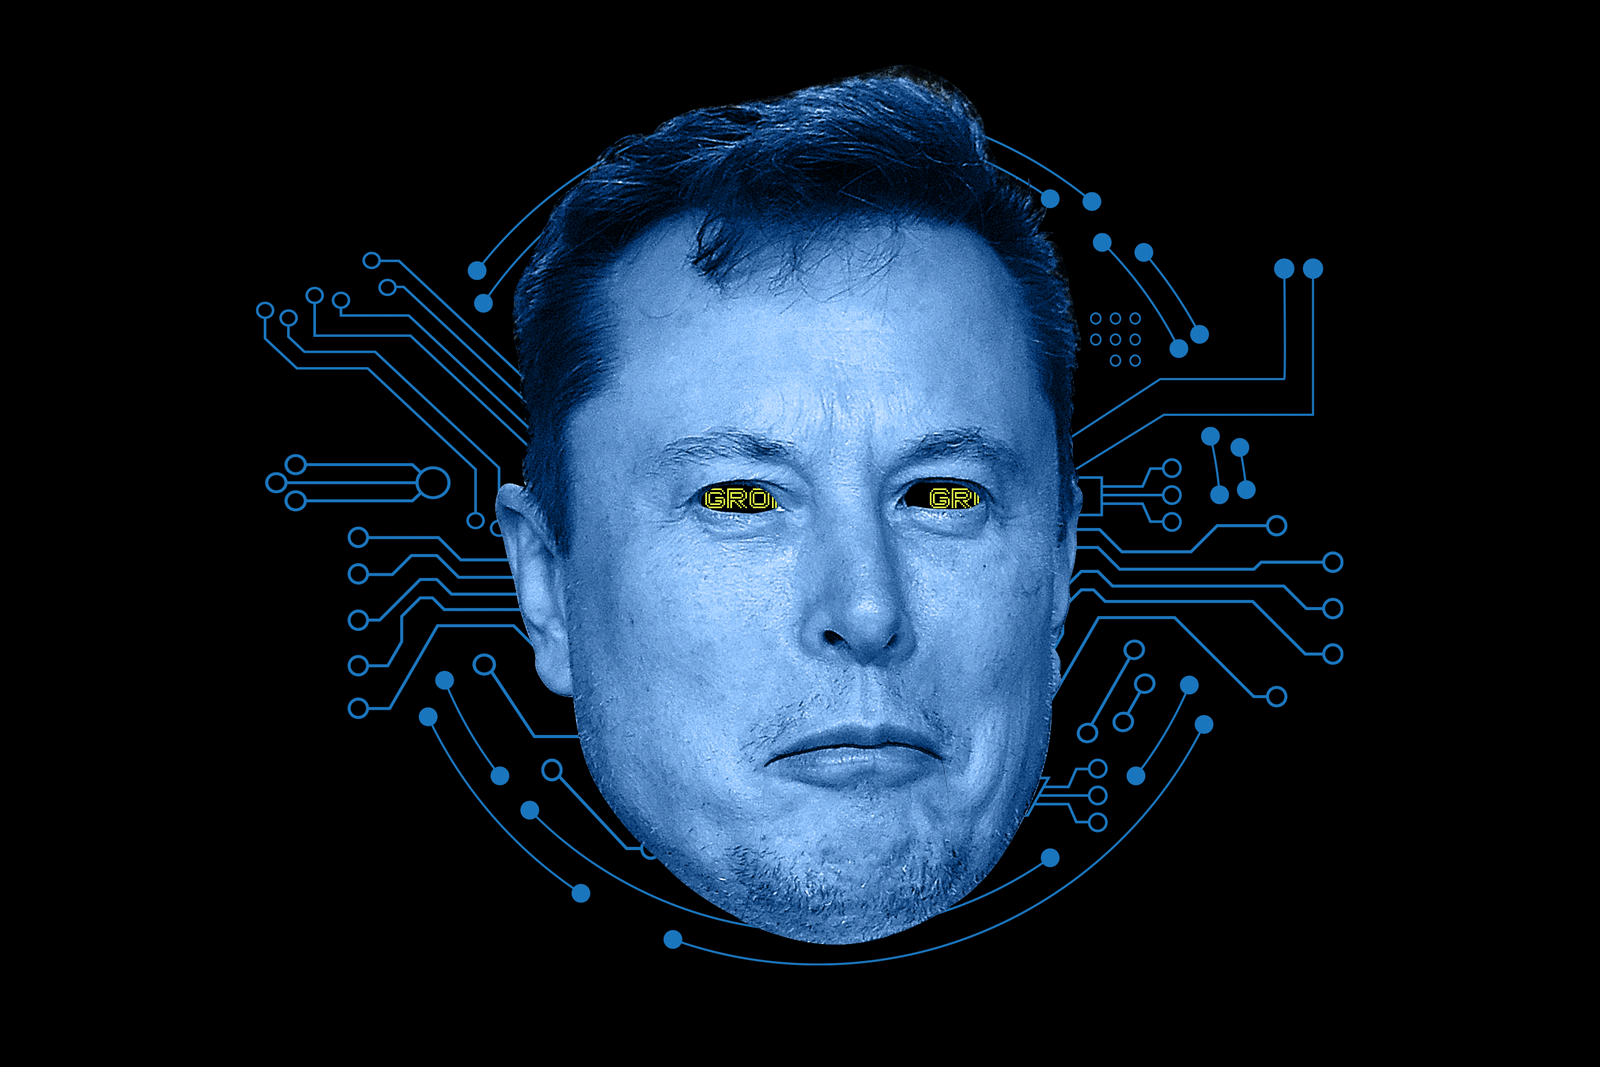 A weirdly candid interview with Elon Musk's new AI chatbot, about Elon Musk